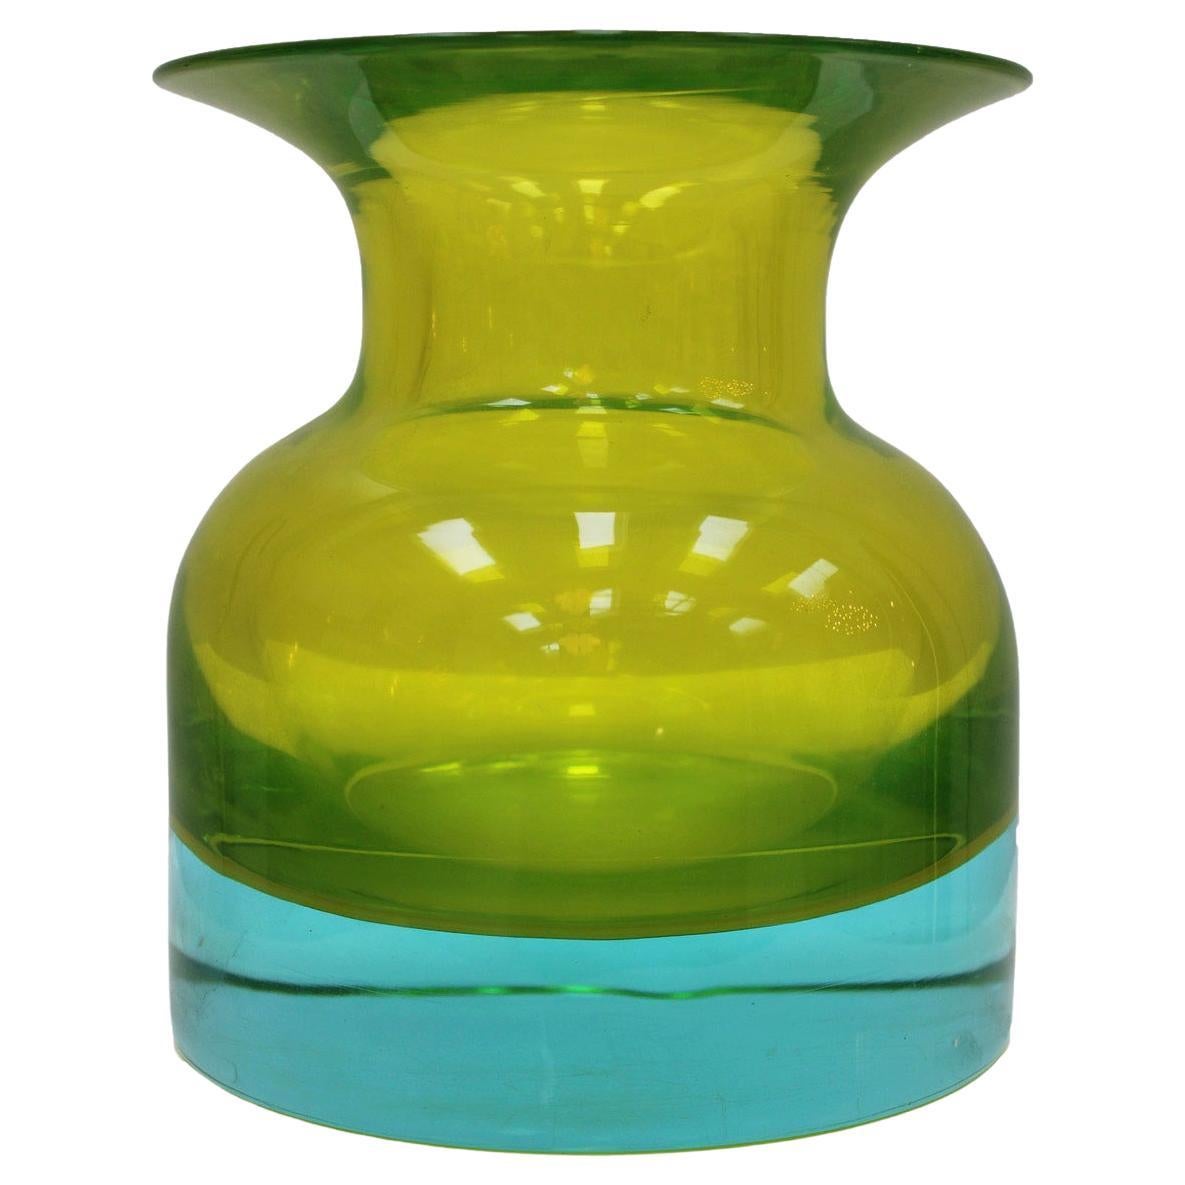 MidCentury Turquoise Yellow Sommerso Murano Glass Vase by Flavio Poli 1950 For Sale